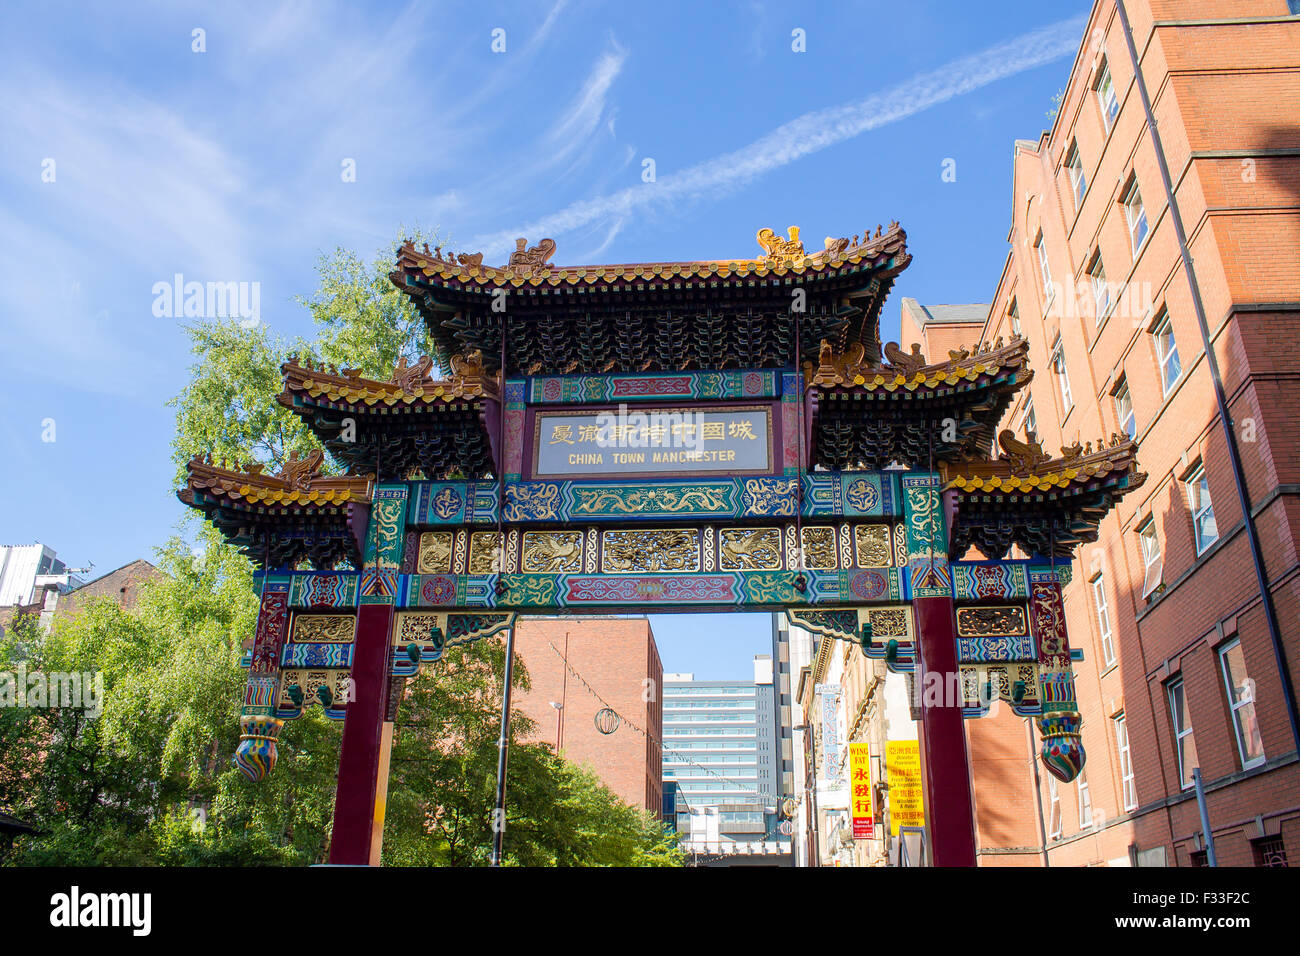 Chinese Arch in Chinatown district of central Manchester, United Kingdom. Stock Photo